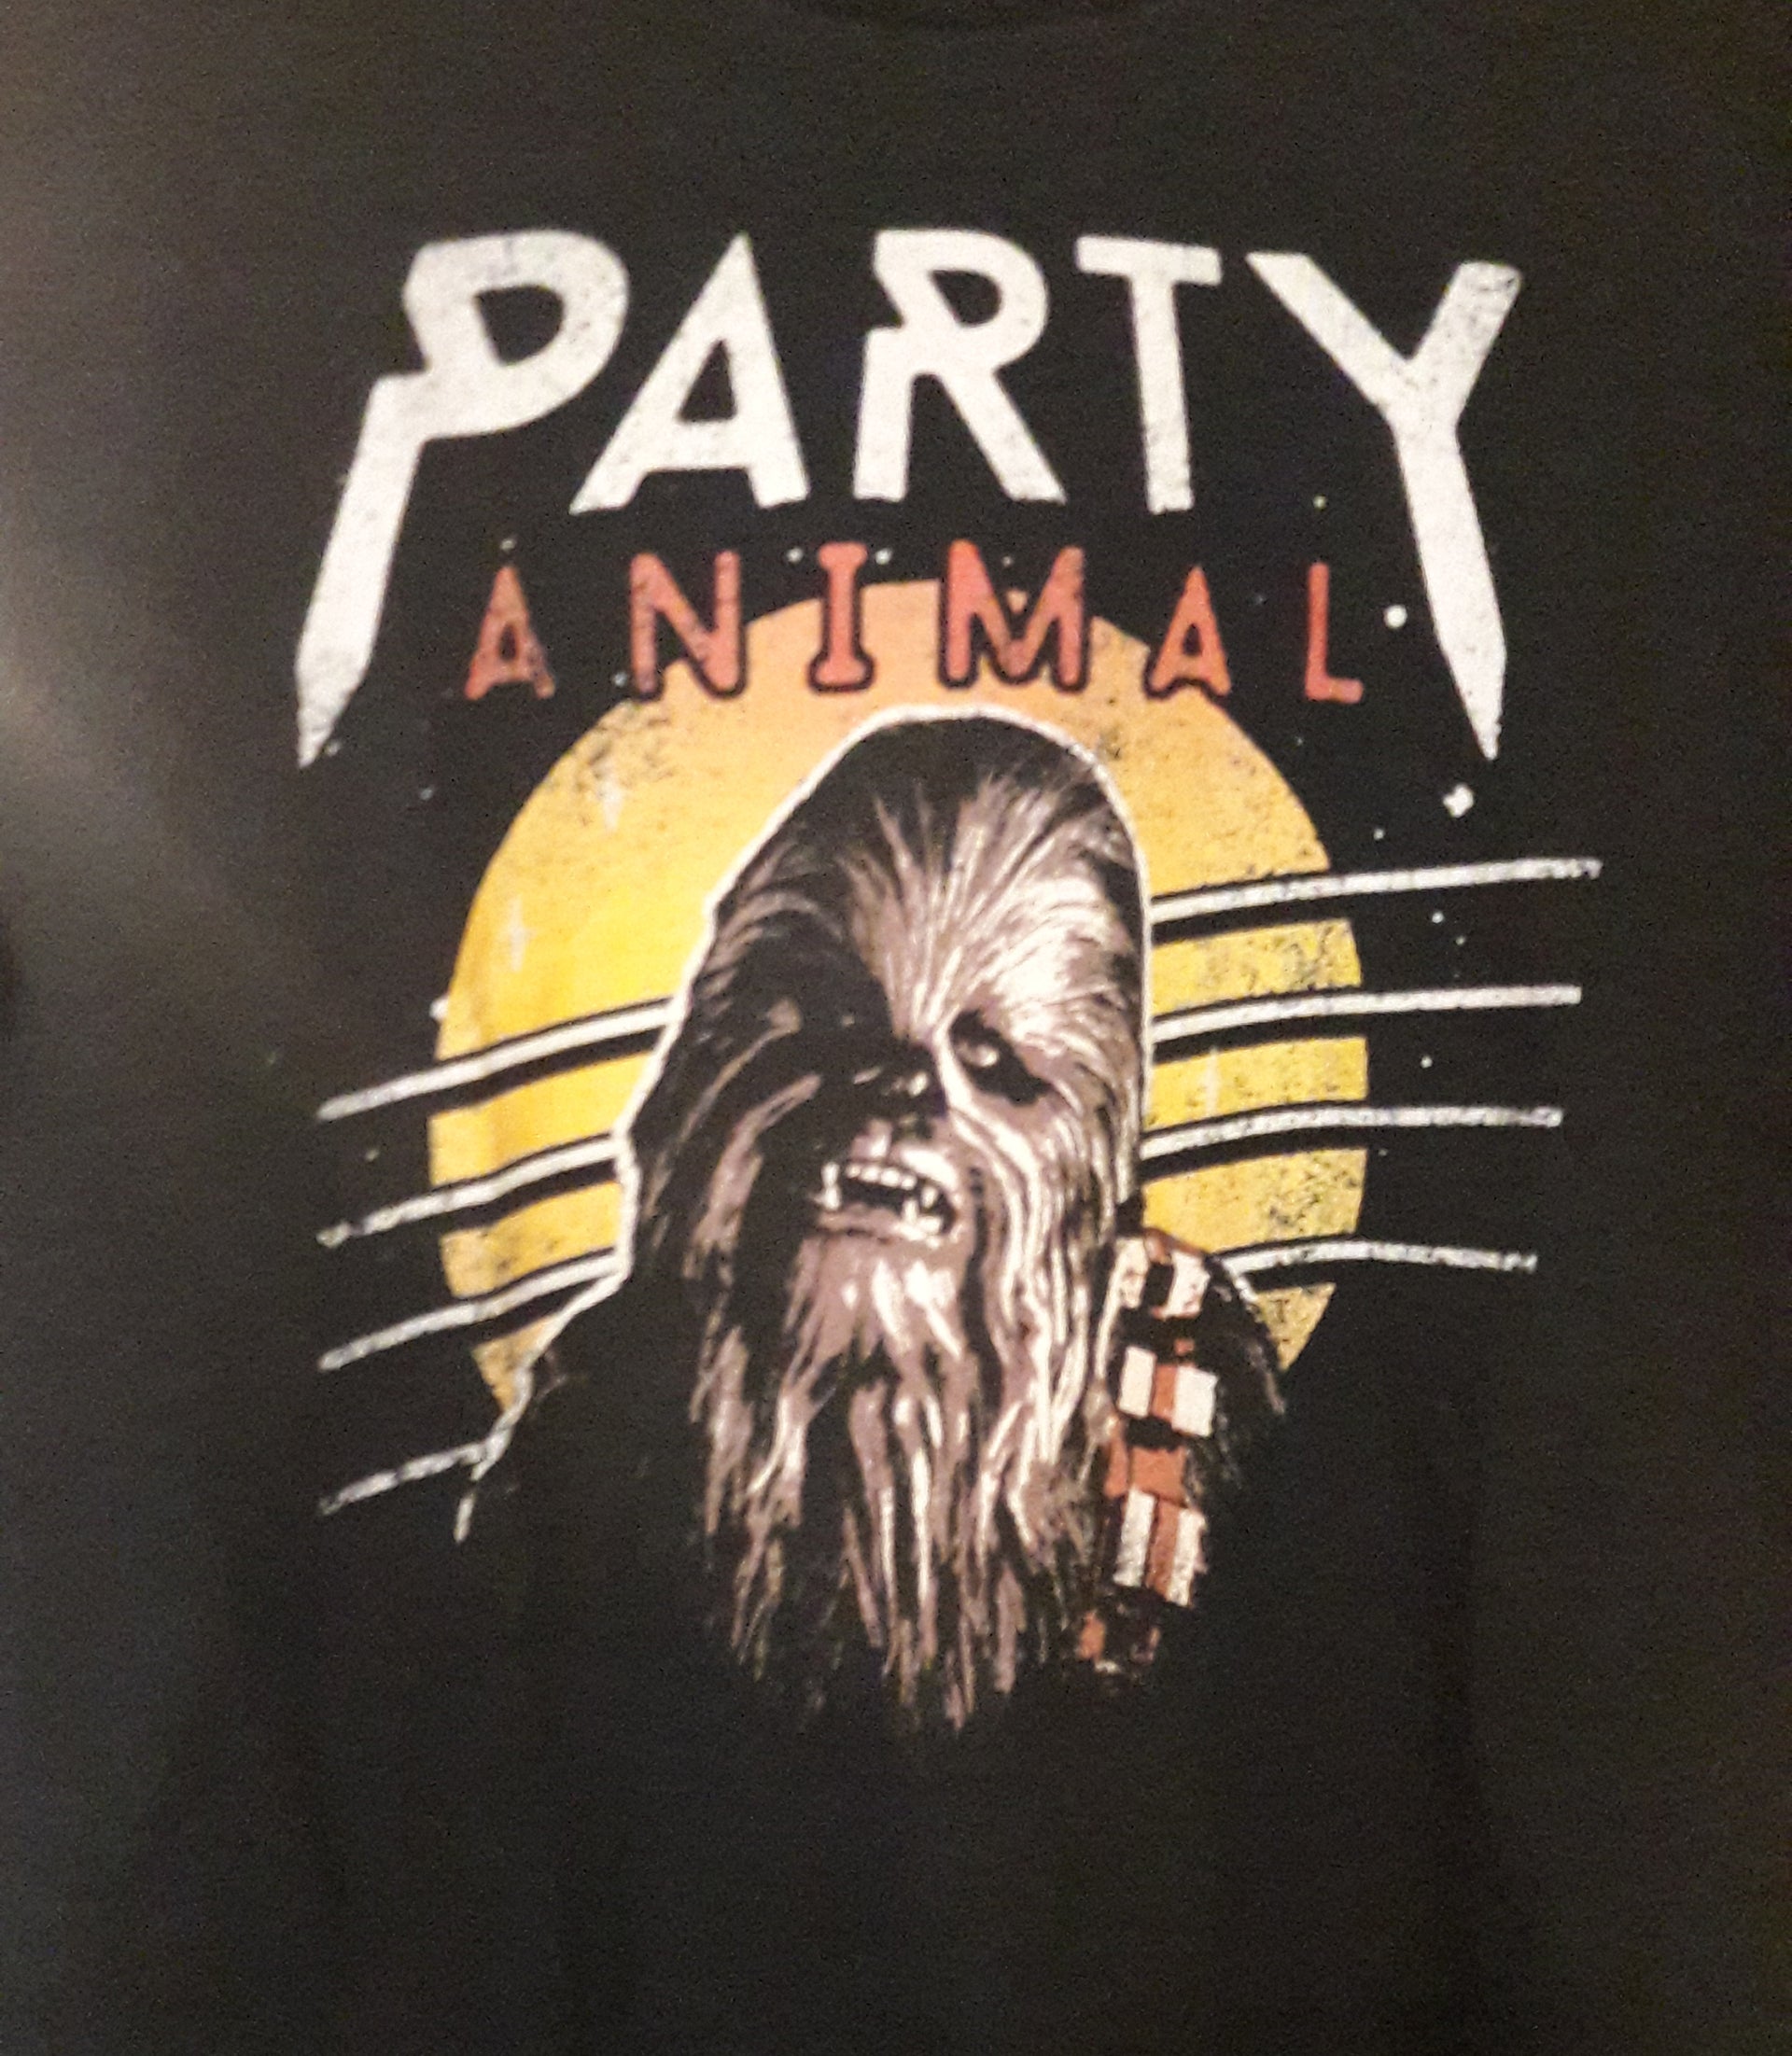 Star Wars Party Animal